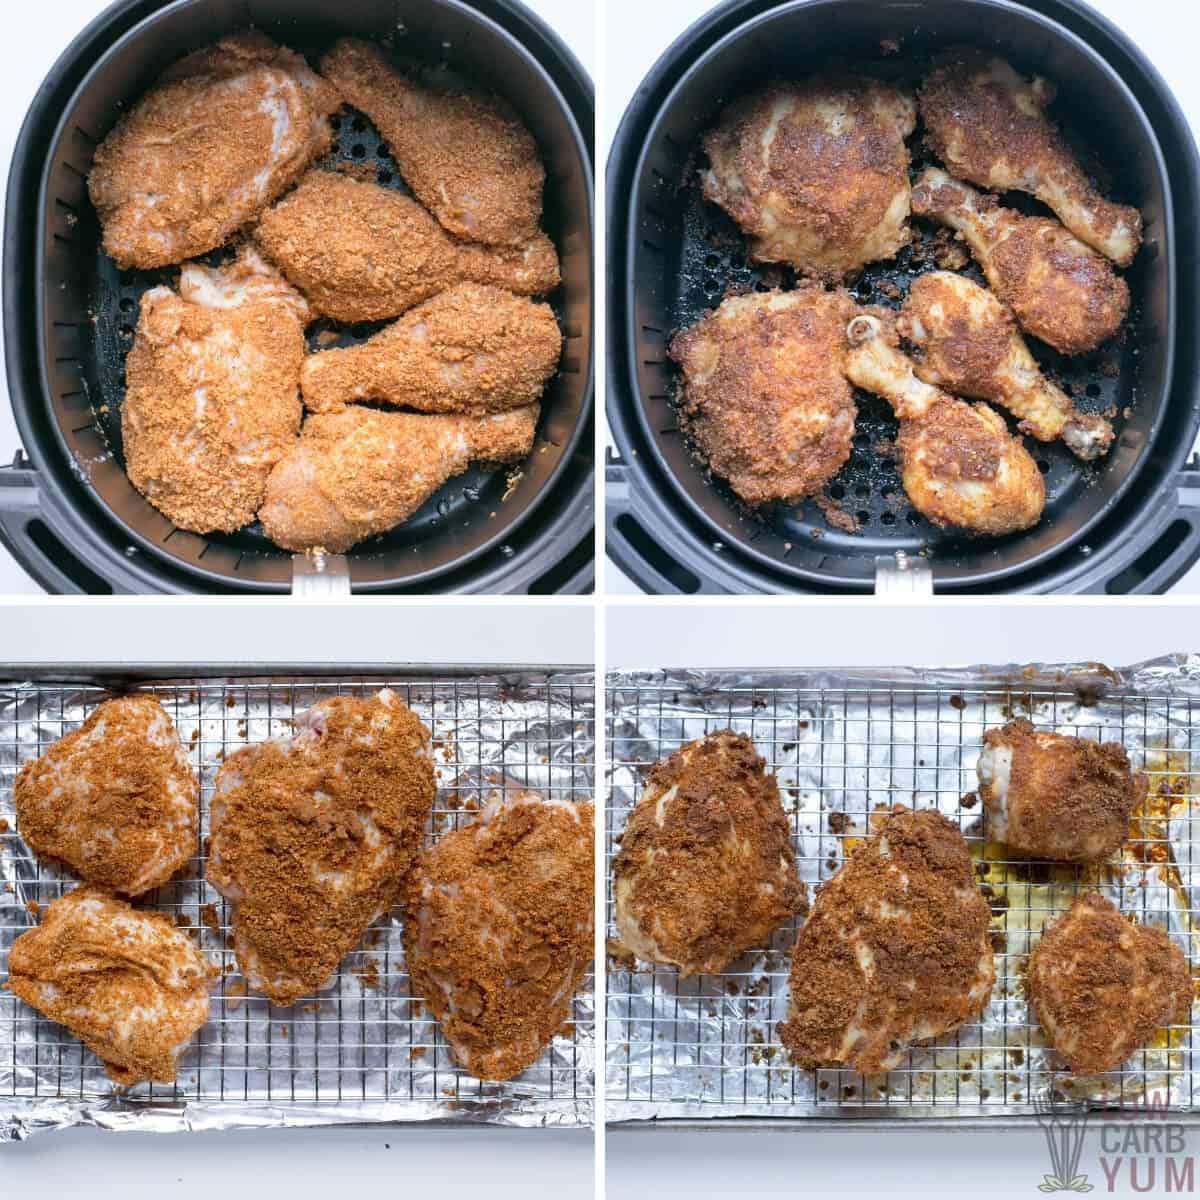 How to make keto fried chicken in air fryer or oven